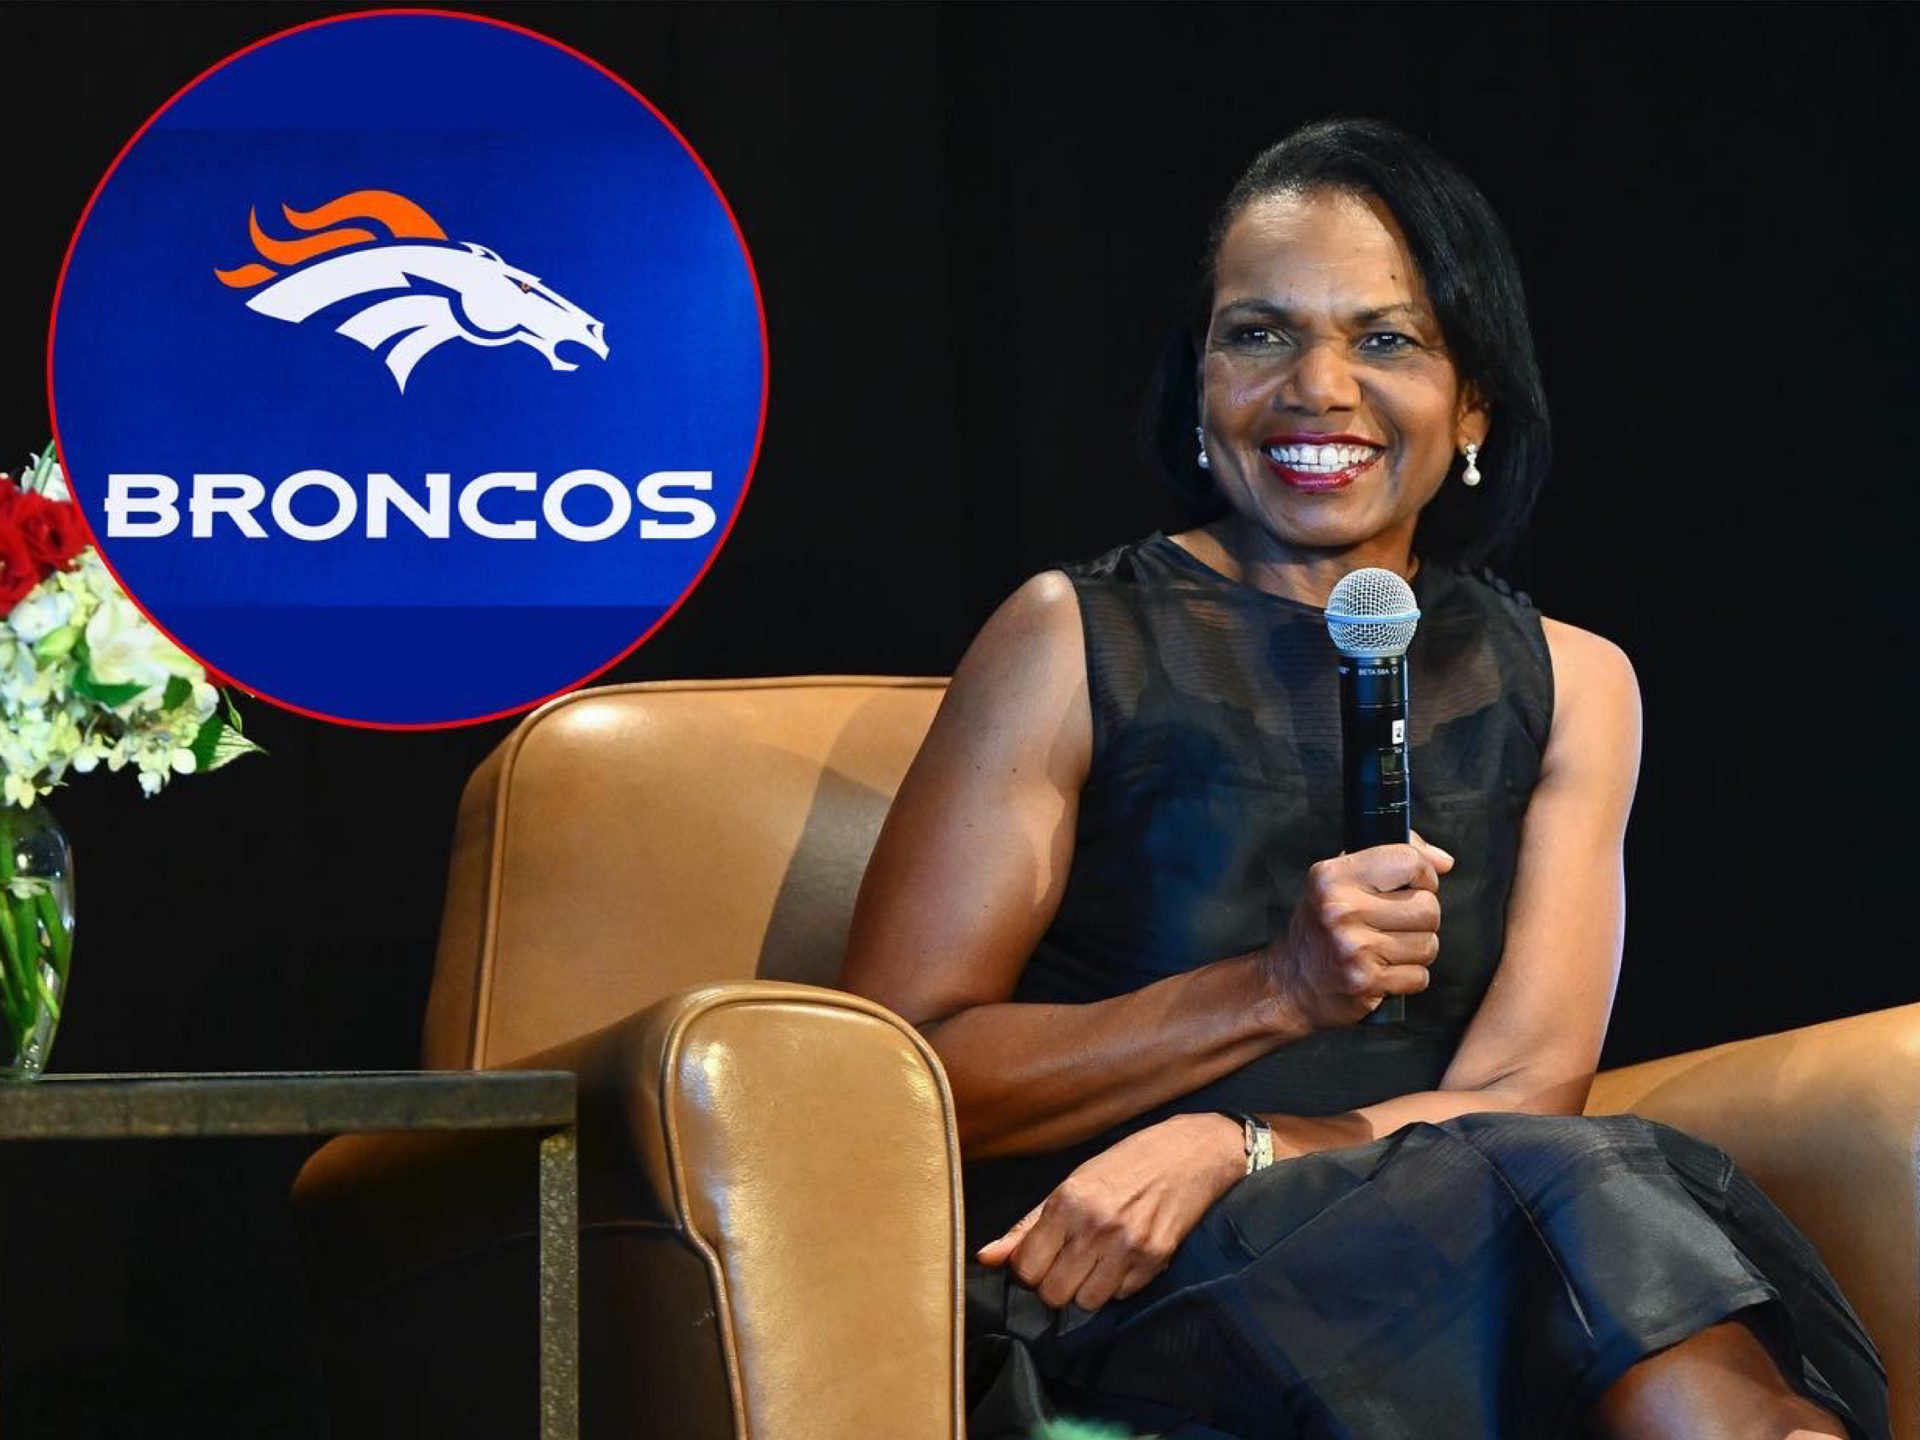 Condoleezza Rice joins the ownership team for the Denver Broncos after being a fan of football and the city for years.